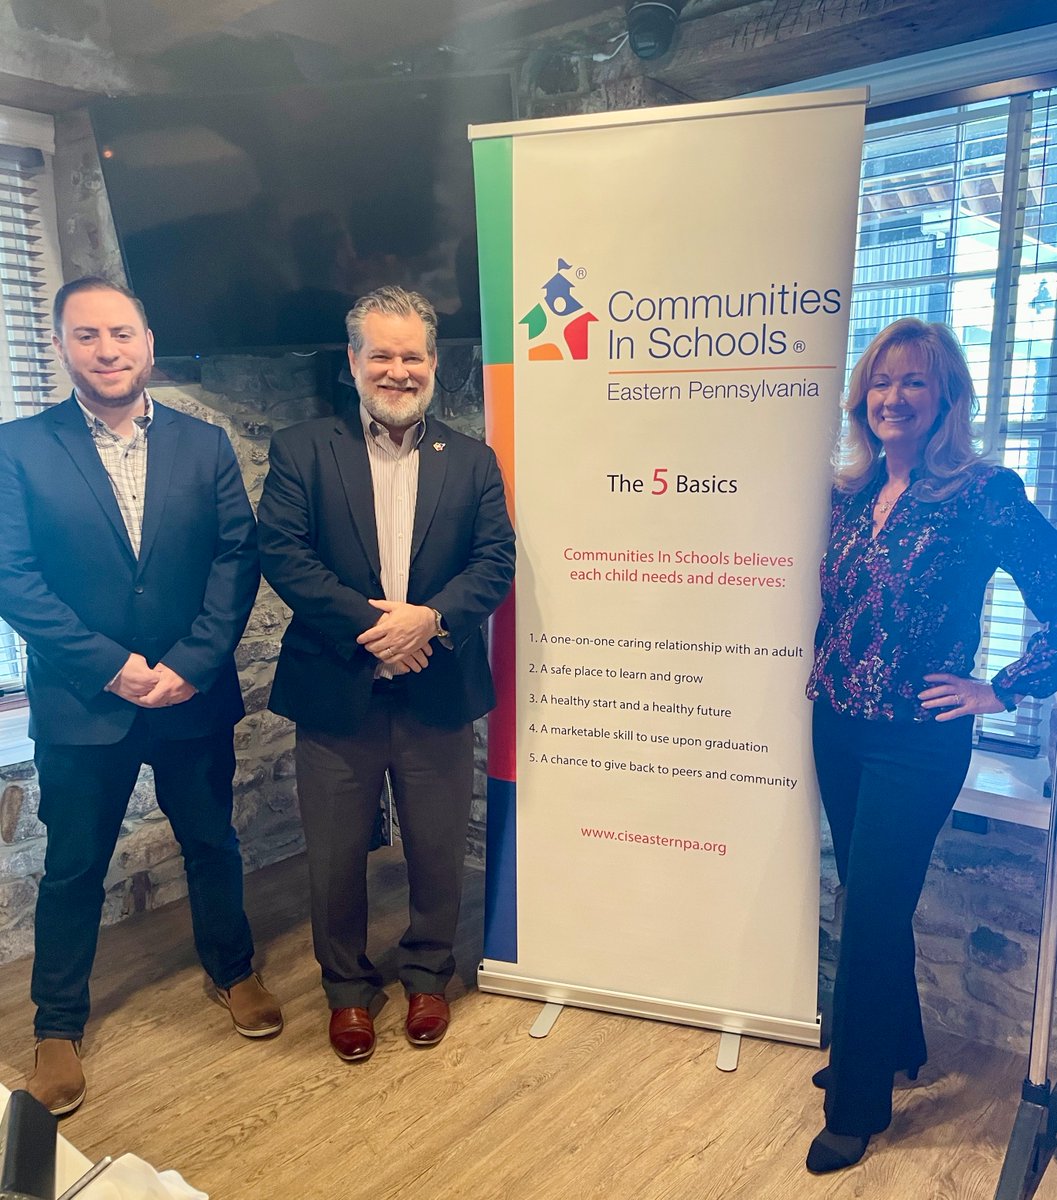 #CISEasternPA hosted Leadership Lunches to expand our network 🌟 Attendees gained insight into our school initiatives & expansion plans. Thanks to Steel Club & Folino Estate Winery for hosting!

Interested in supporting our work? Visit: brnw.ch/21wJkcw 🎓 #AllInForKids